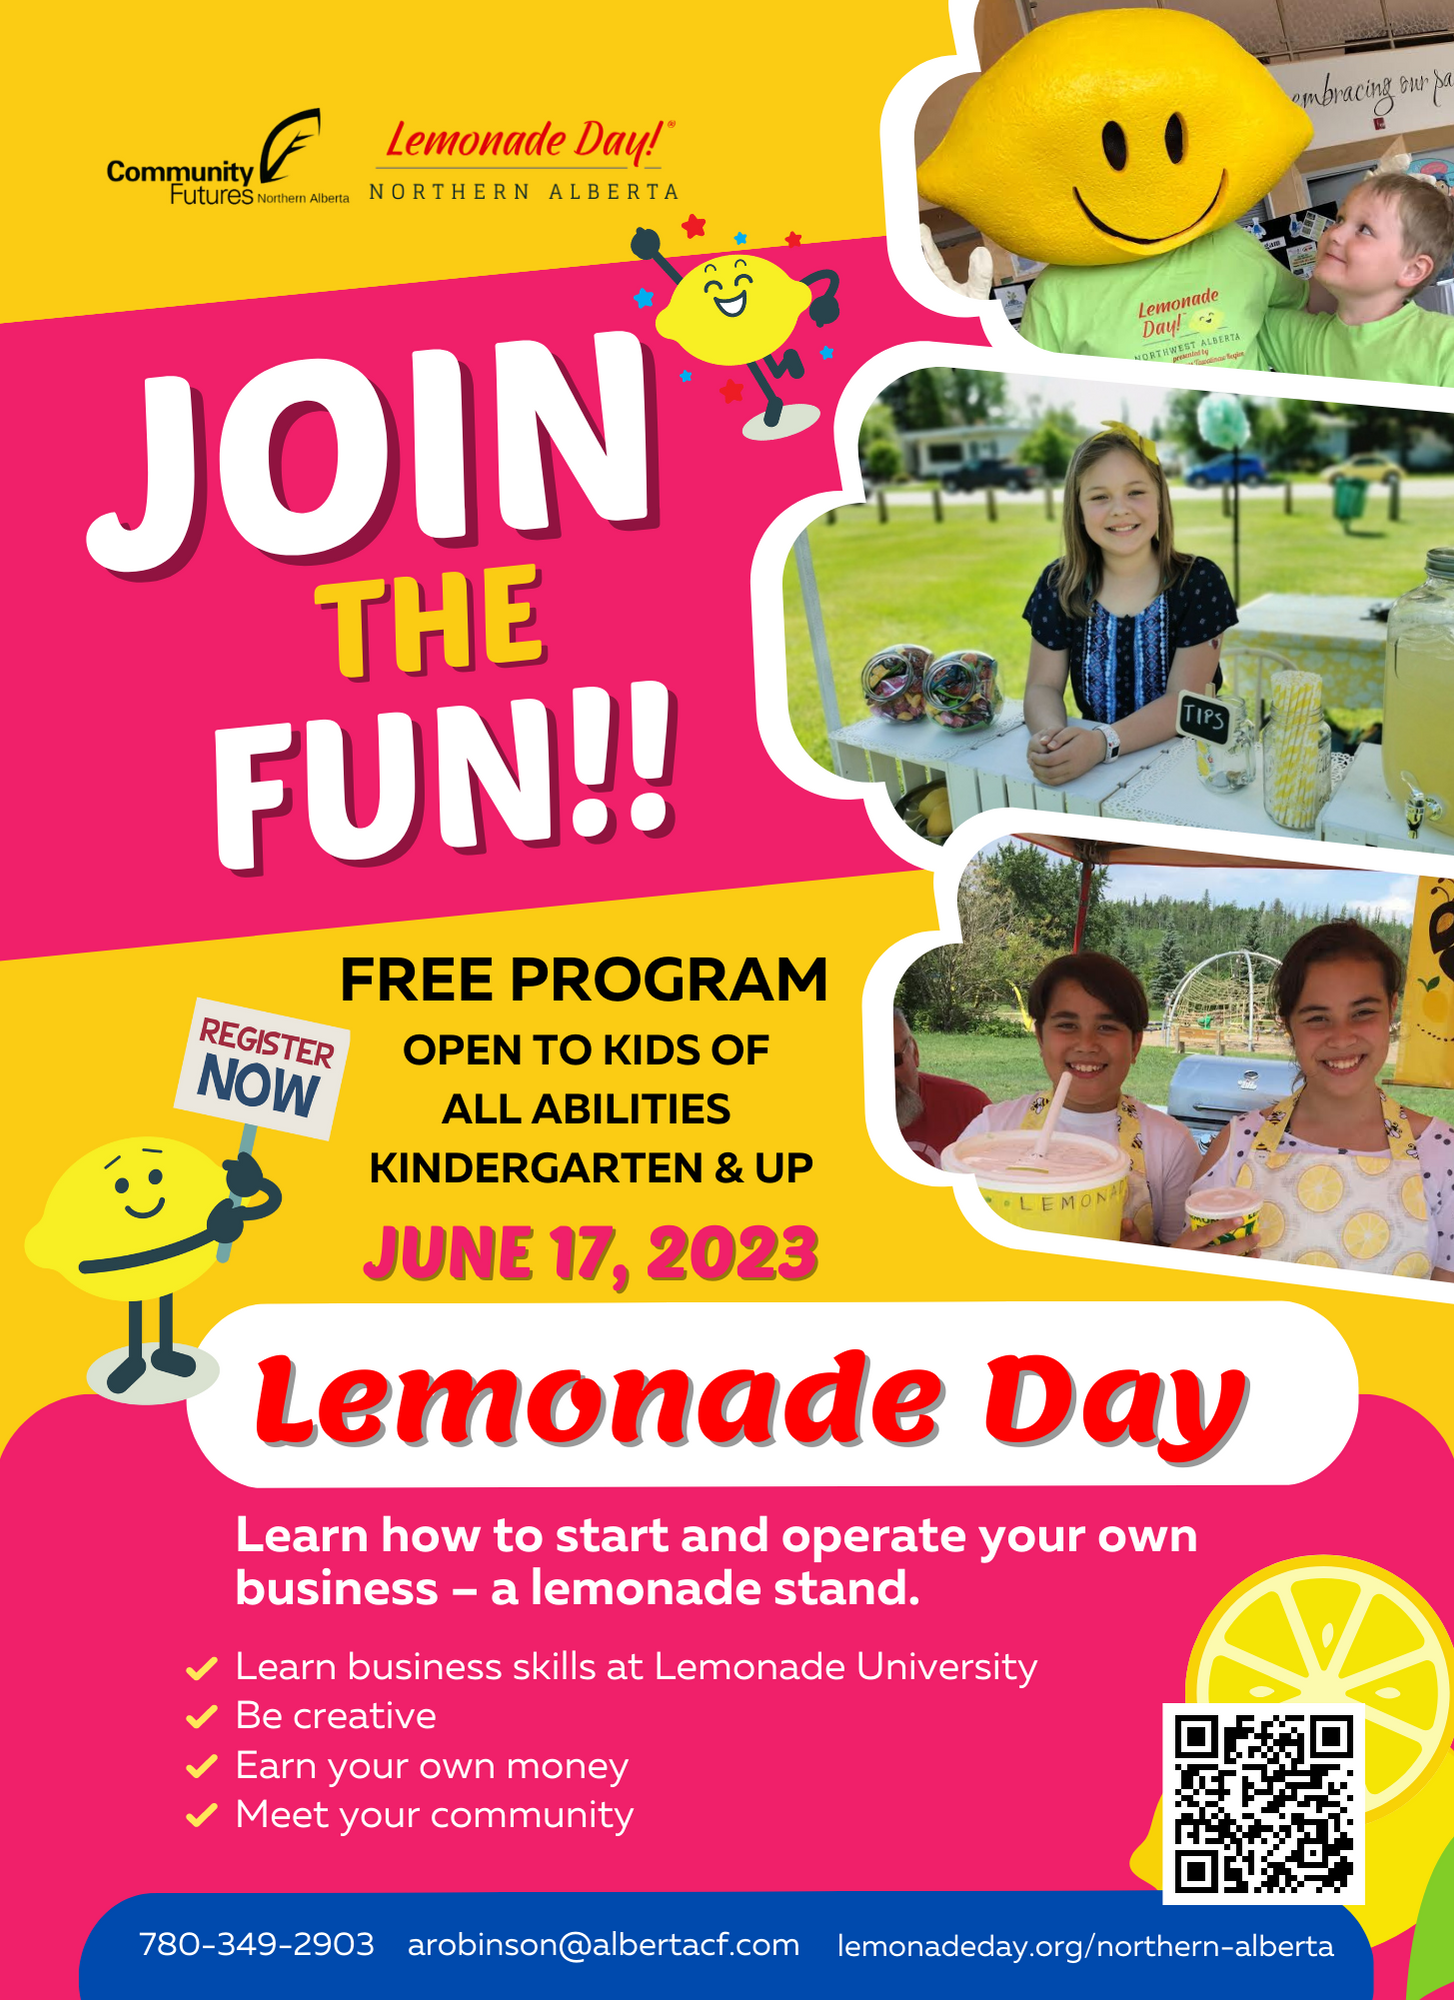 2023 Lemonade Day Poster 8 x 11 NEW Pink and yellow 1